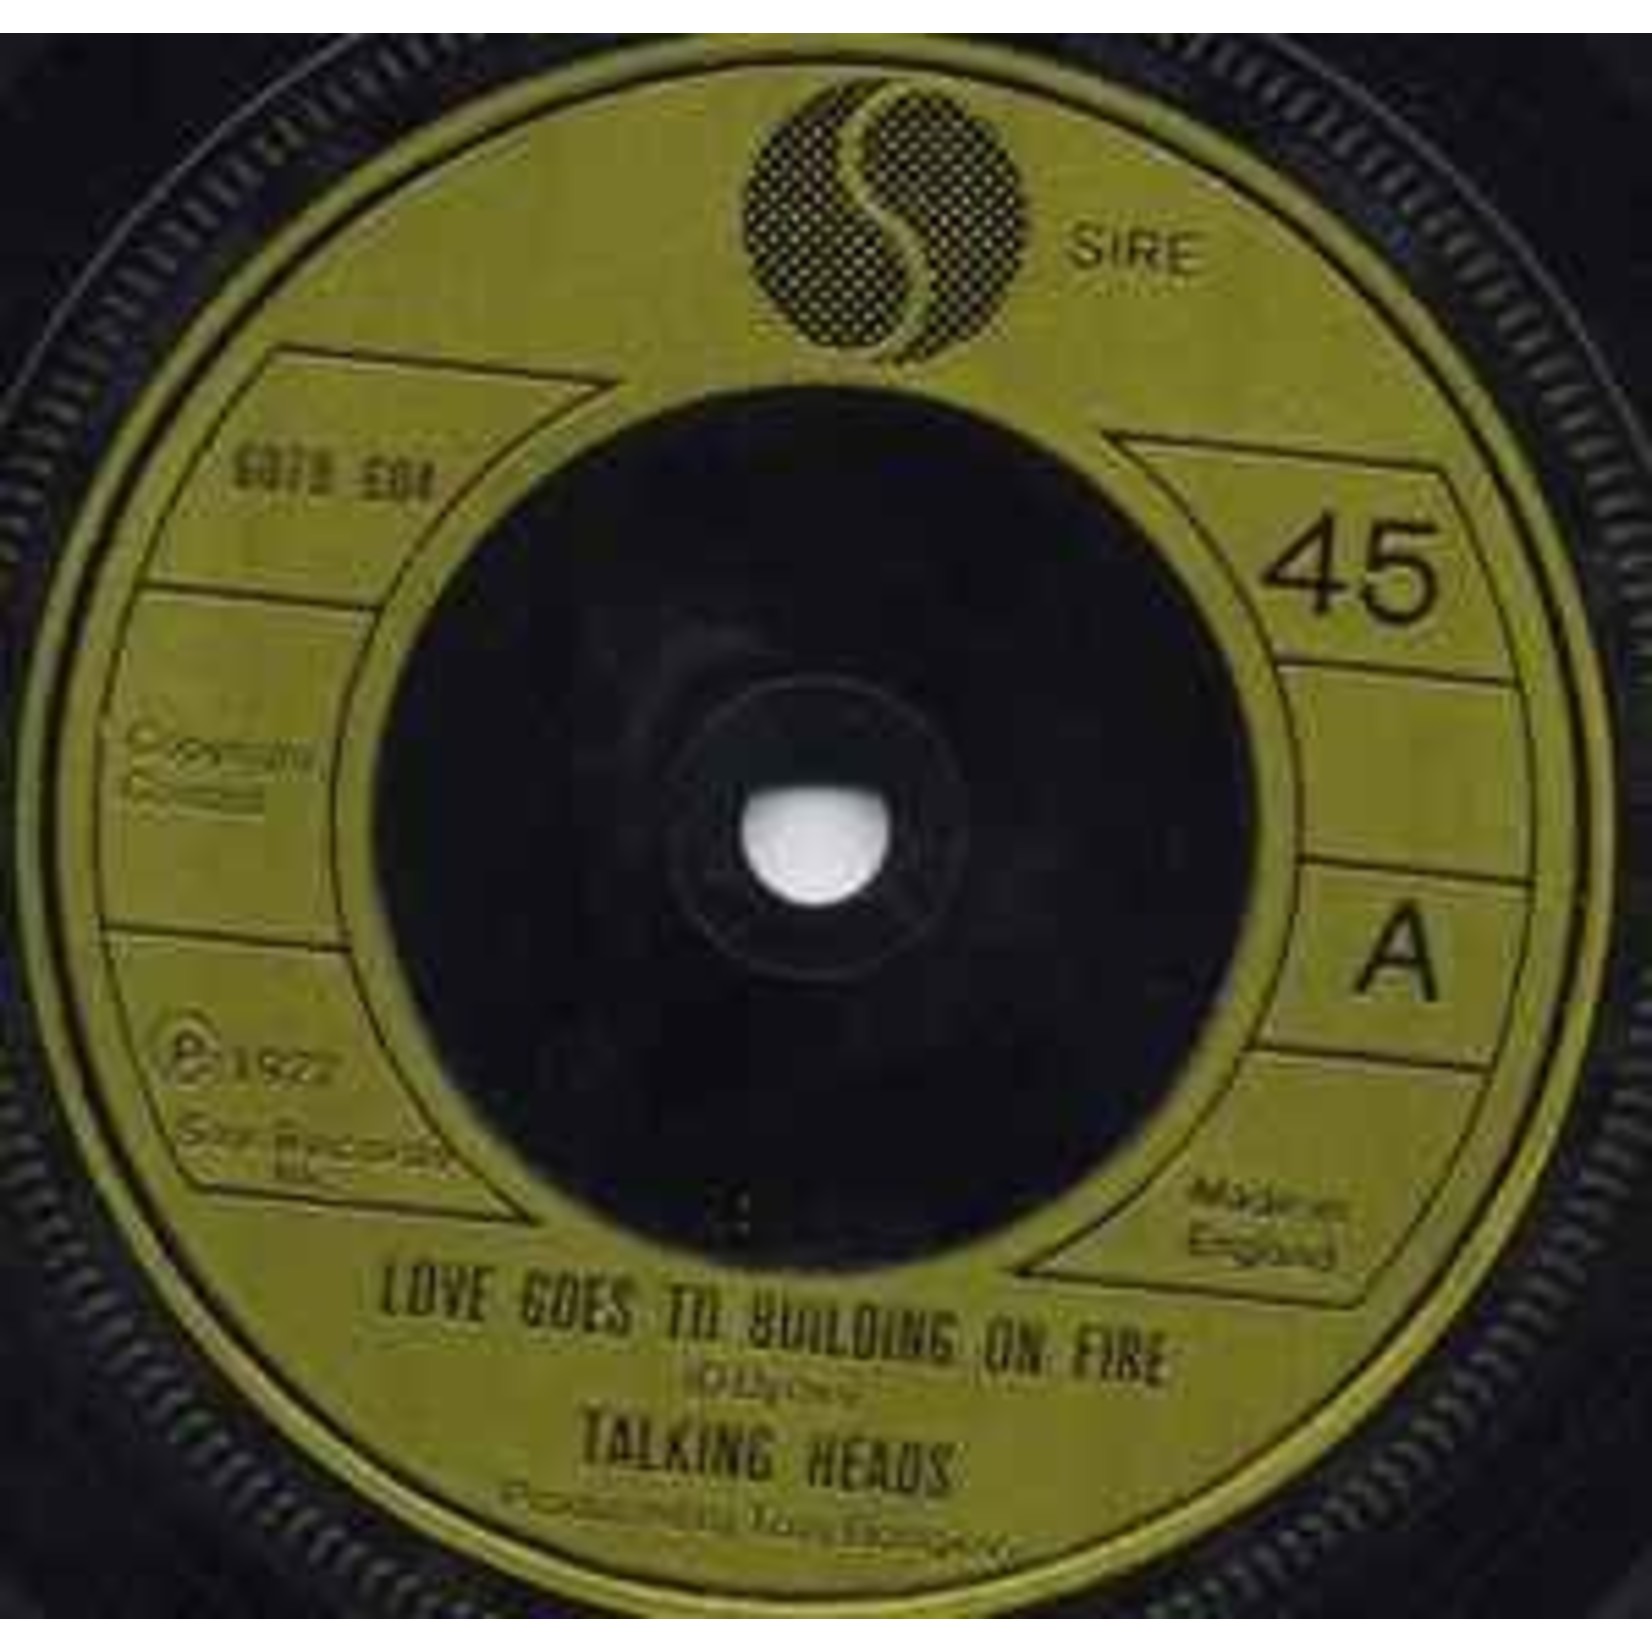 Sire Talking Heads - Love Goes to Building on Fire / New Feeling (7") [1977] {VG}